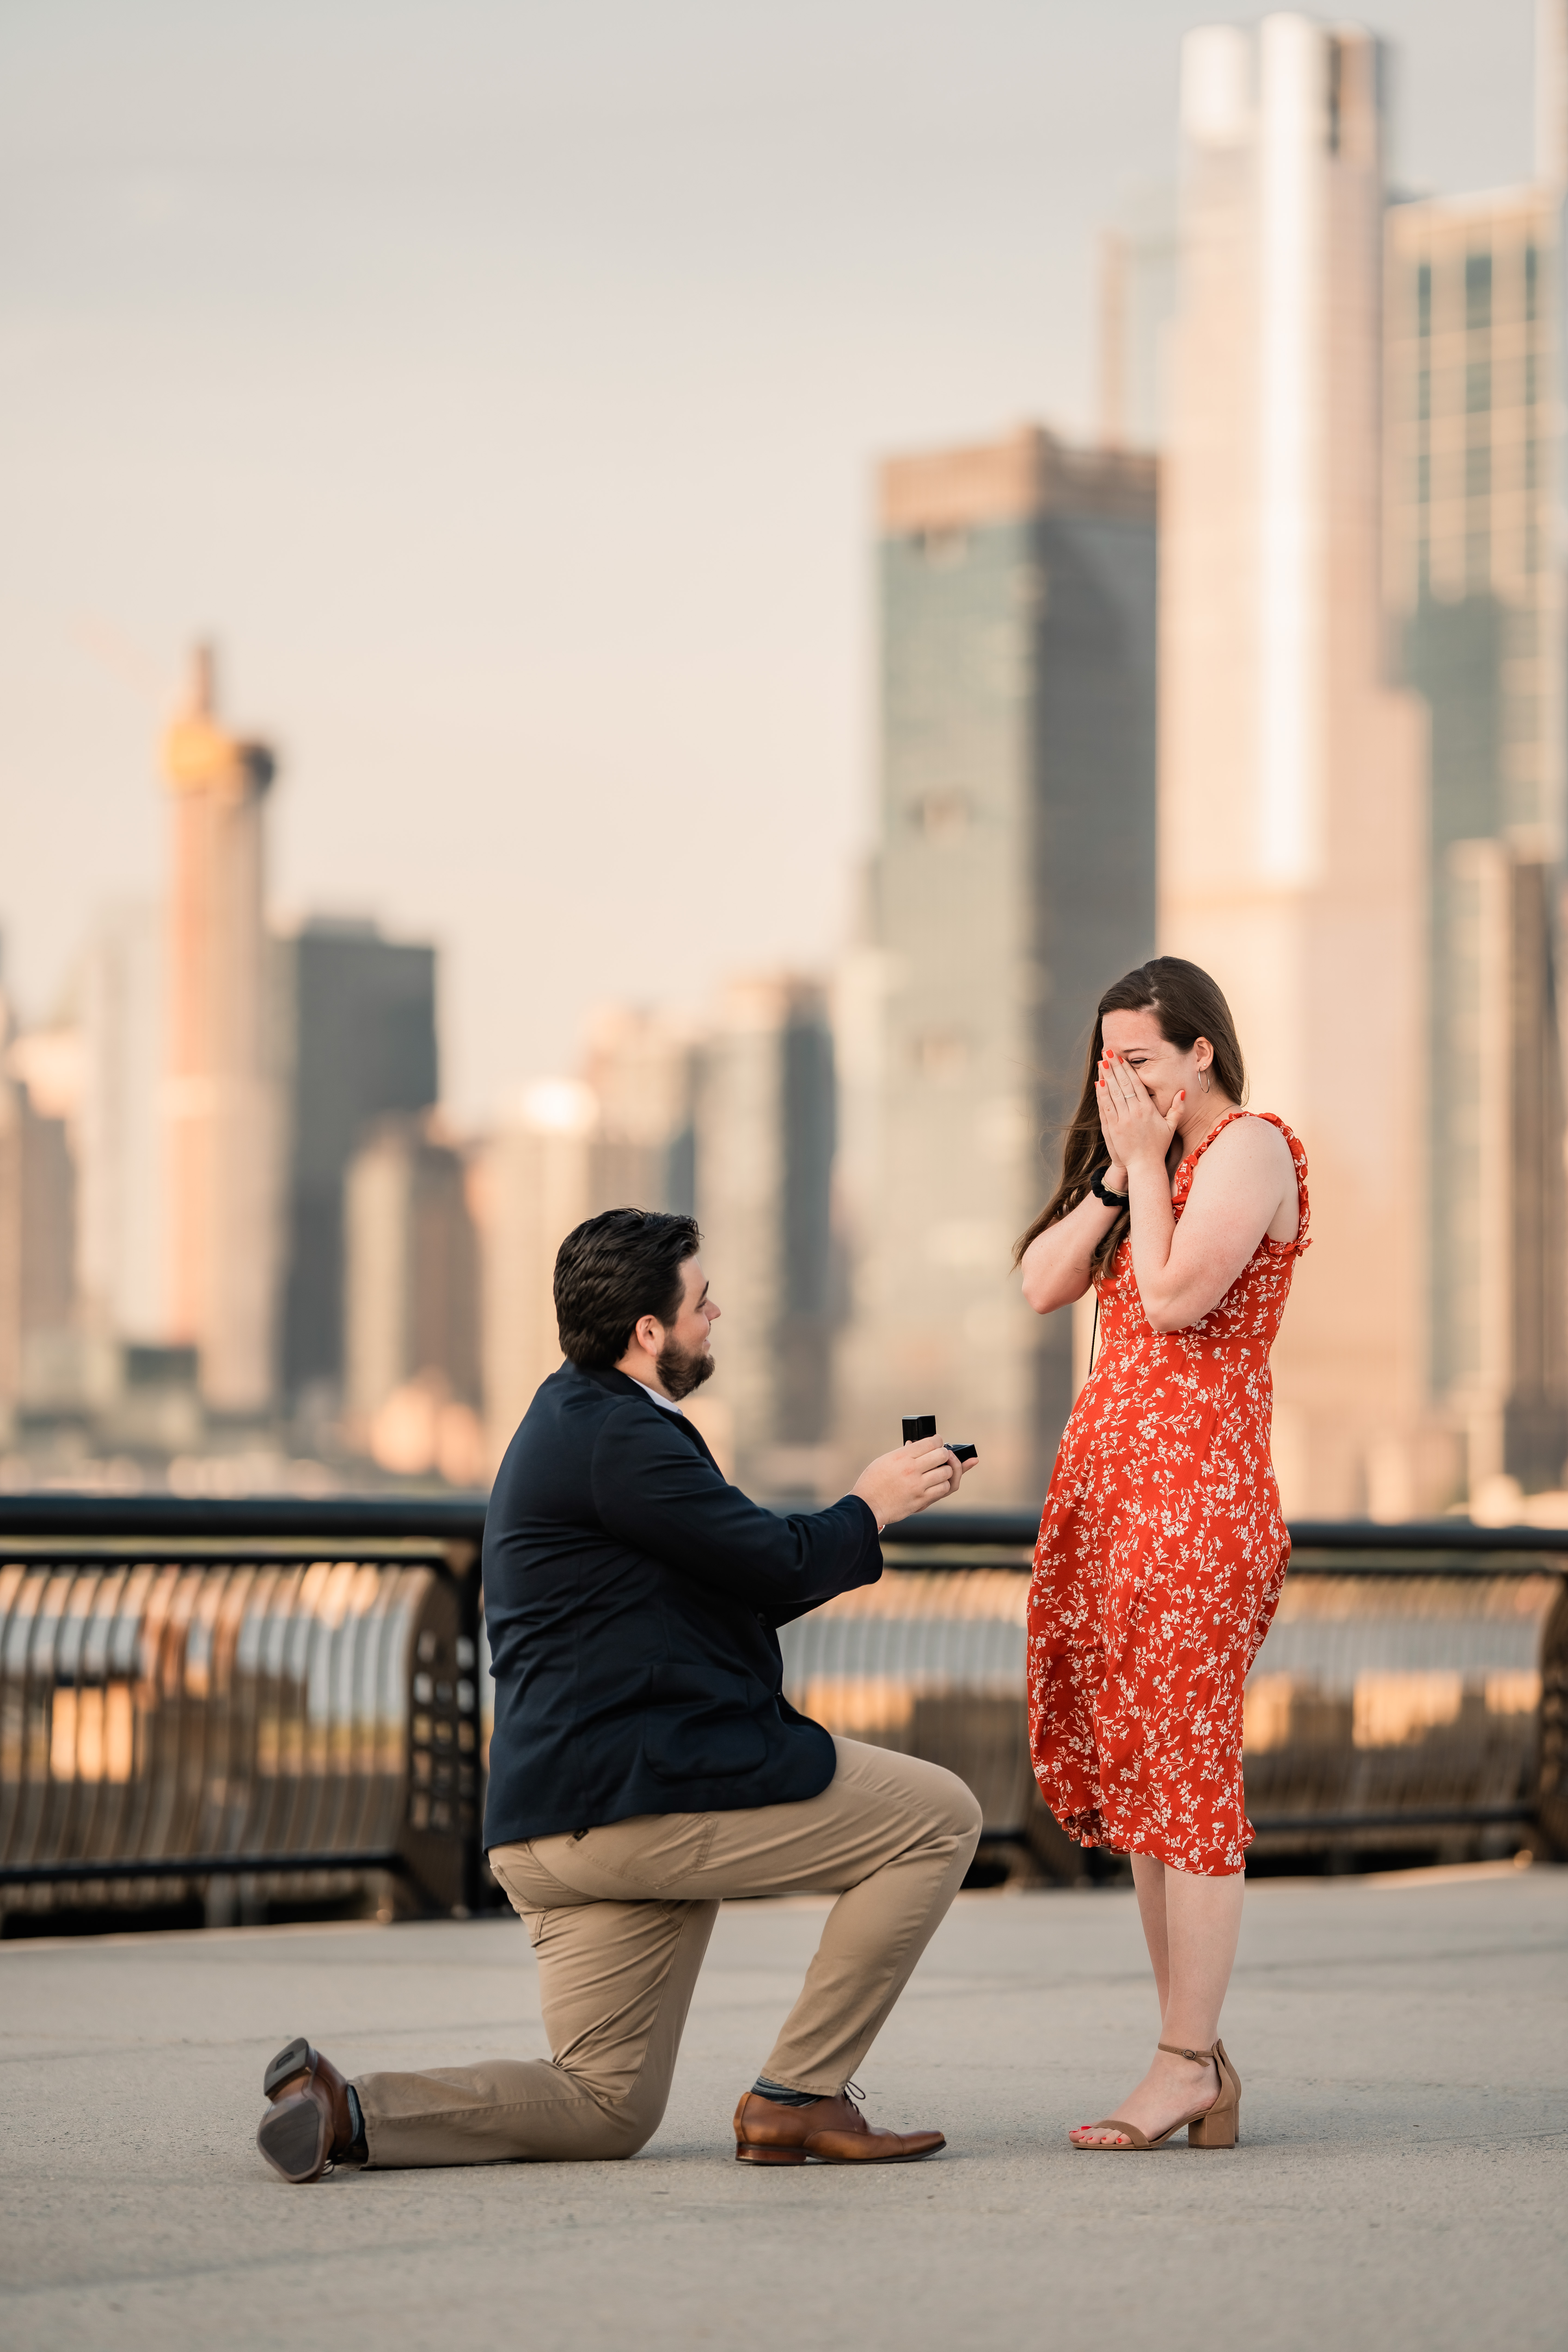 Hoboken New Jersey Proposal, Hoboken Proposal, Hoboken Proposal Photographer, Hoboken Photographer, New Jersey Photographer, NJ Engagement Photographer, NJ Winter Proposal, man kneeling down to propose to his fiancé as she covers her face in happiness with the New York skyline 